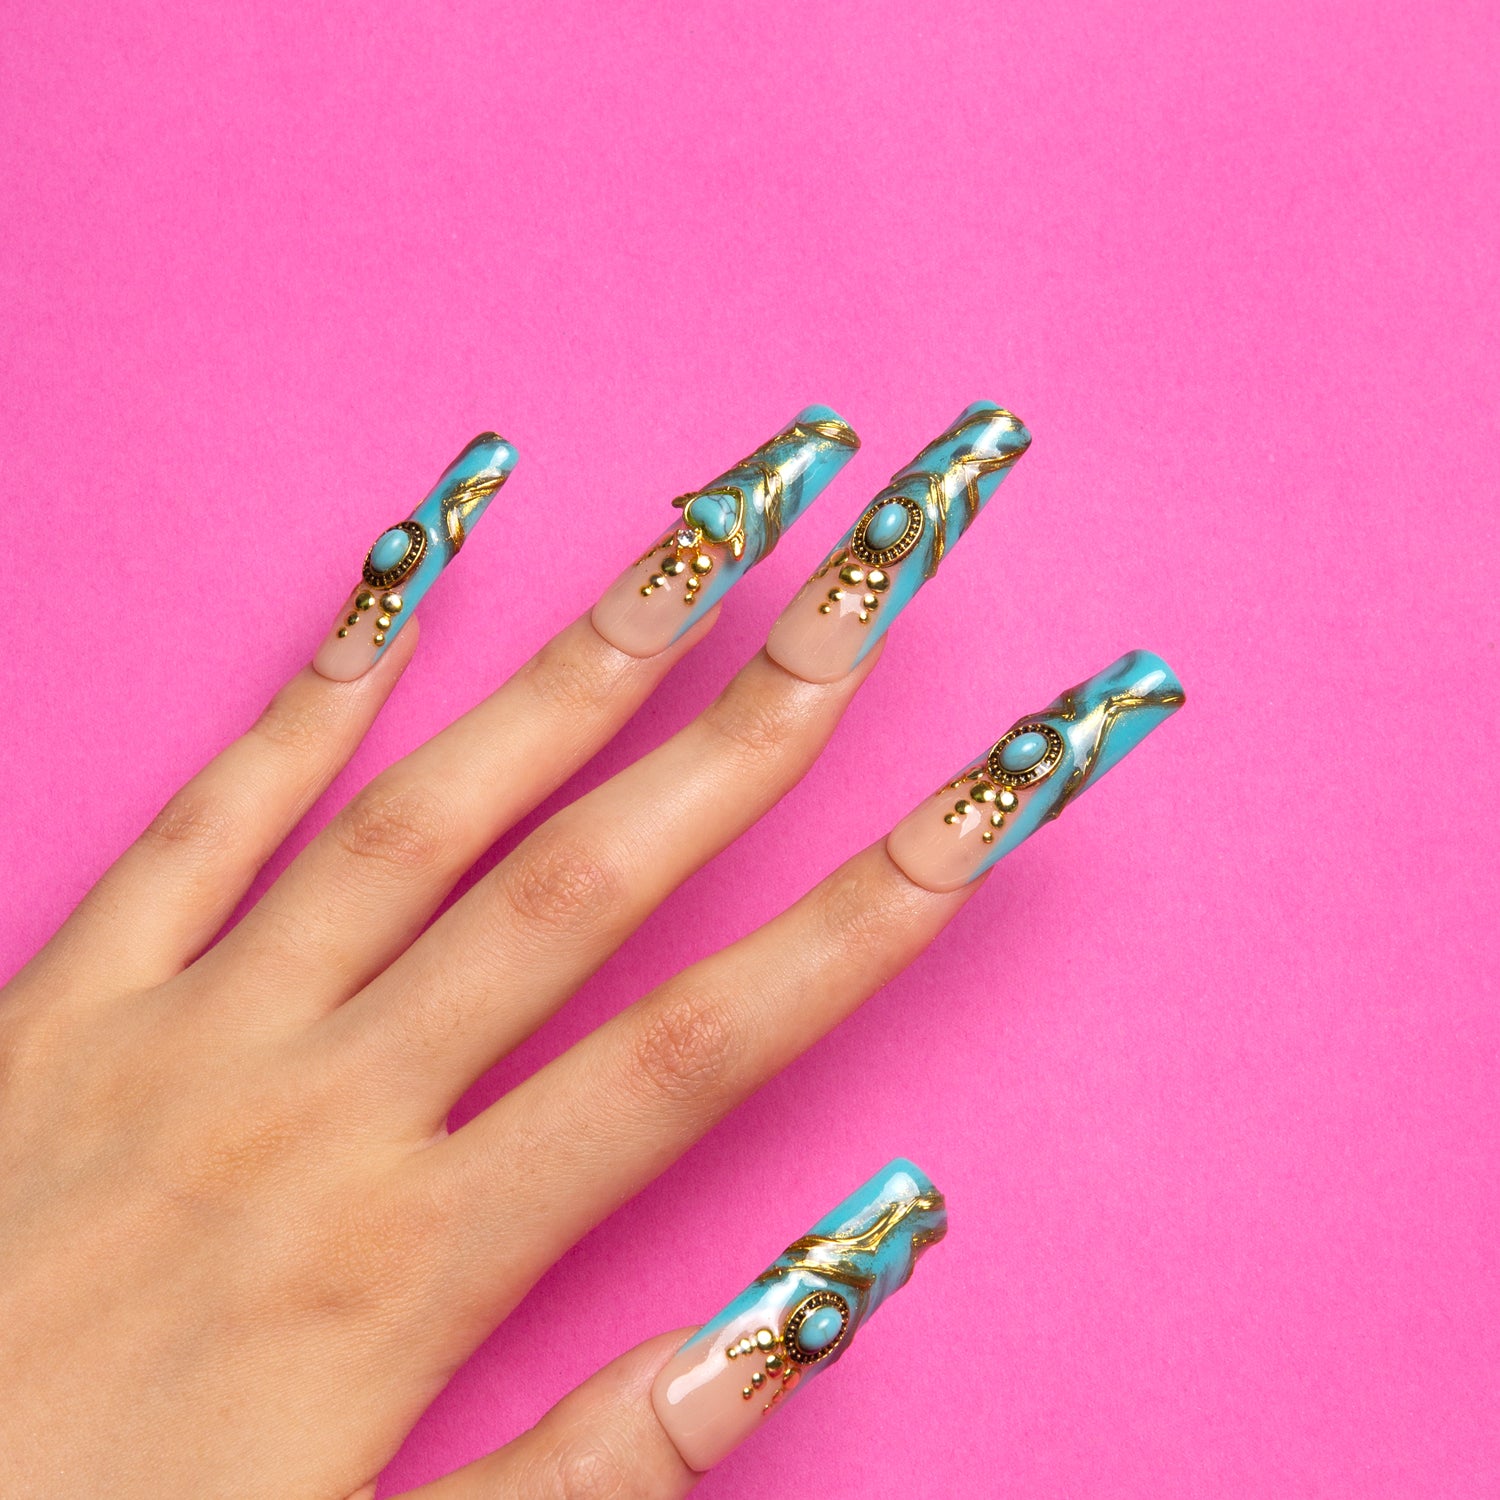 Hand with long square-shaped press-on nails adorned with luxurious turquoise and gold decor, featuring intricate golden patterns and sparkling gems, on a pink background. Perfect for glamorous occasions.